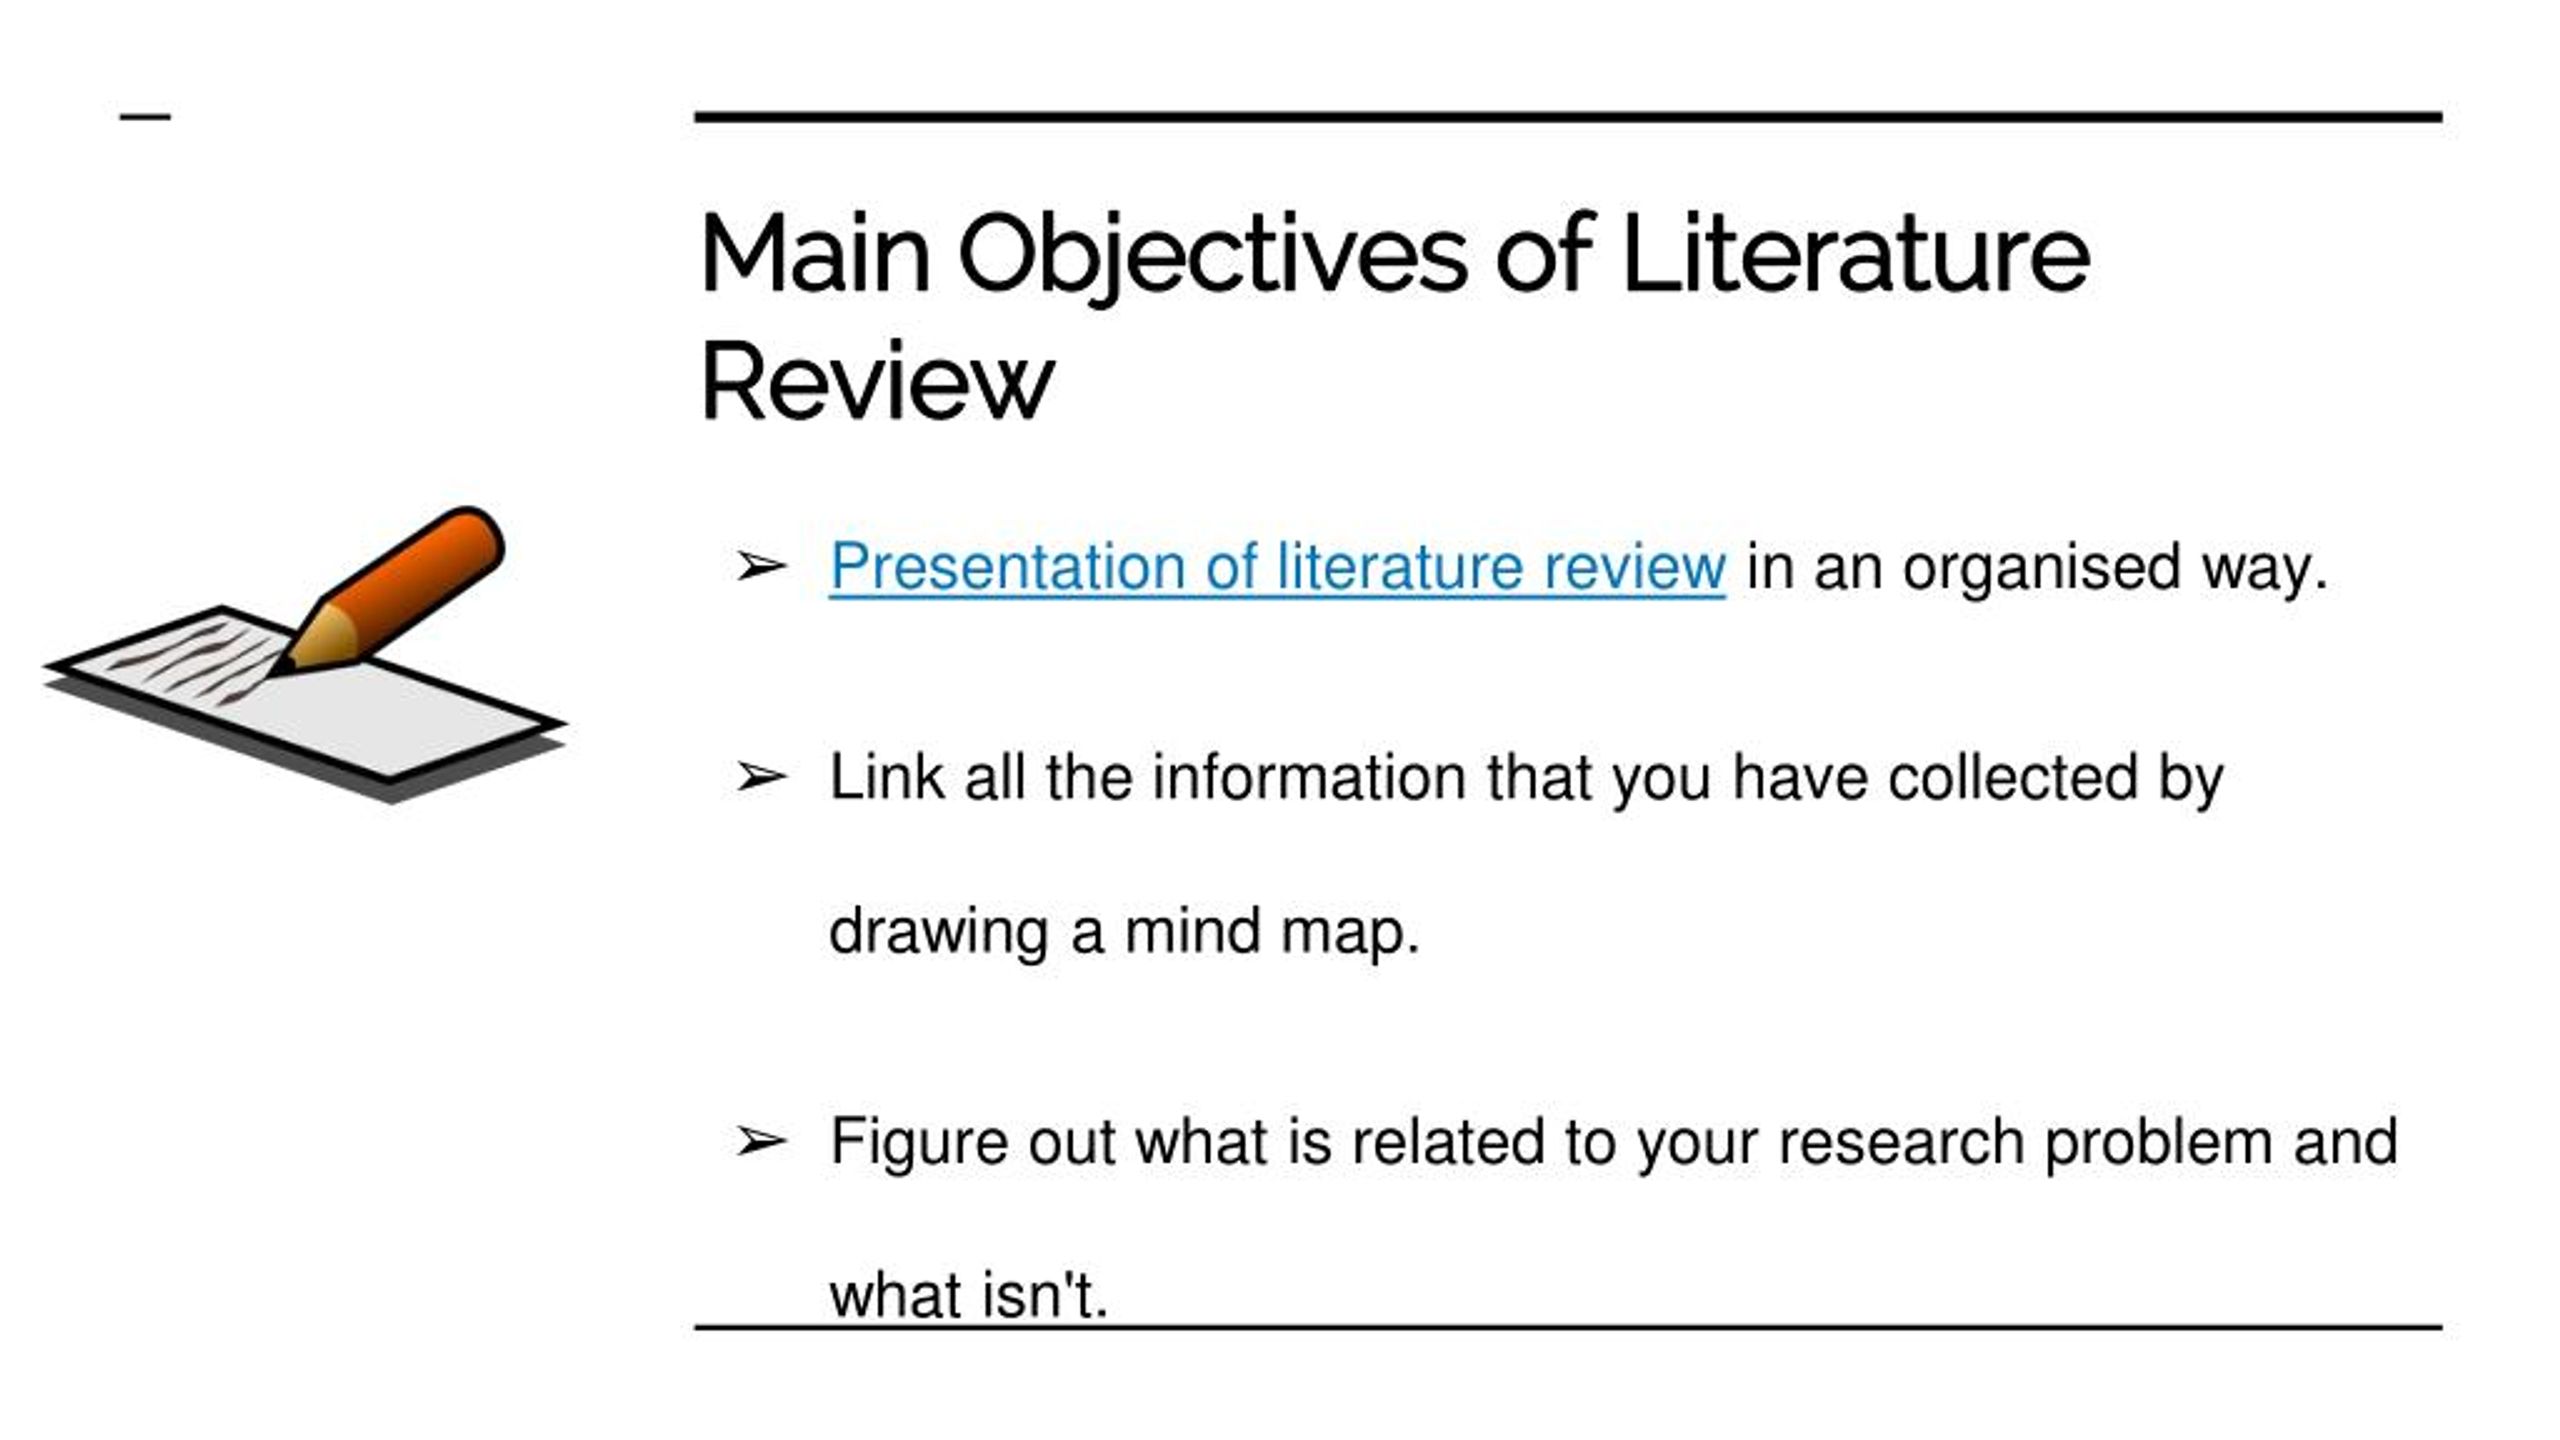 main objective of literature review